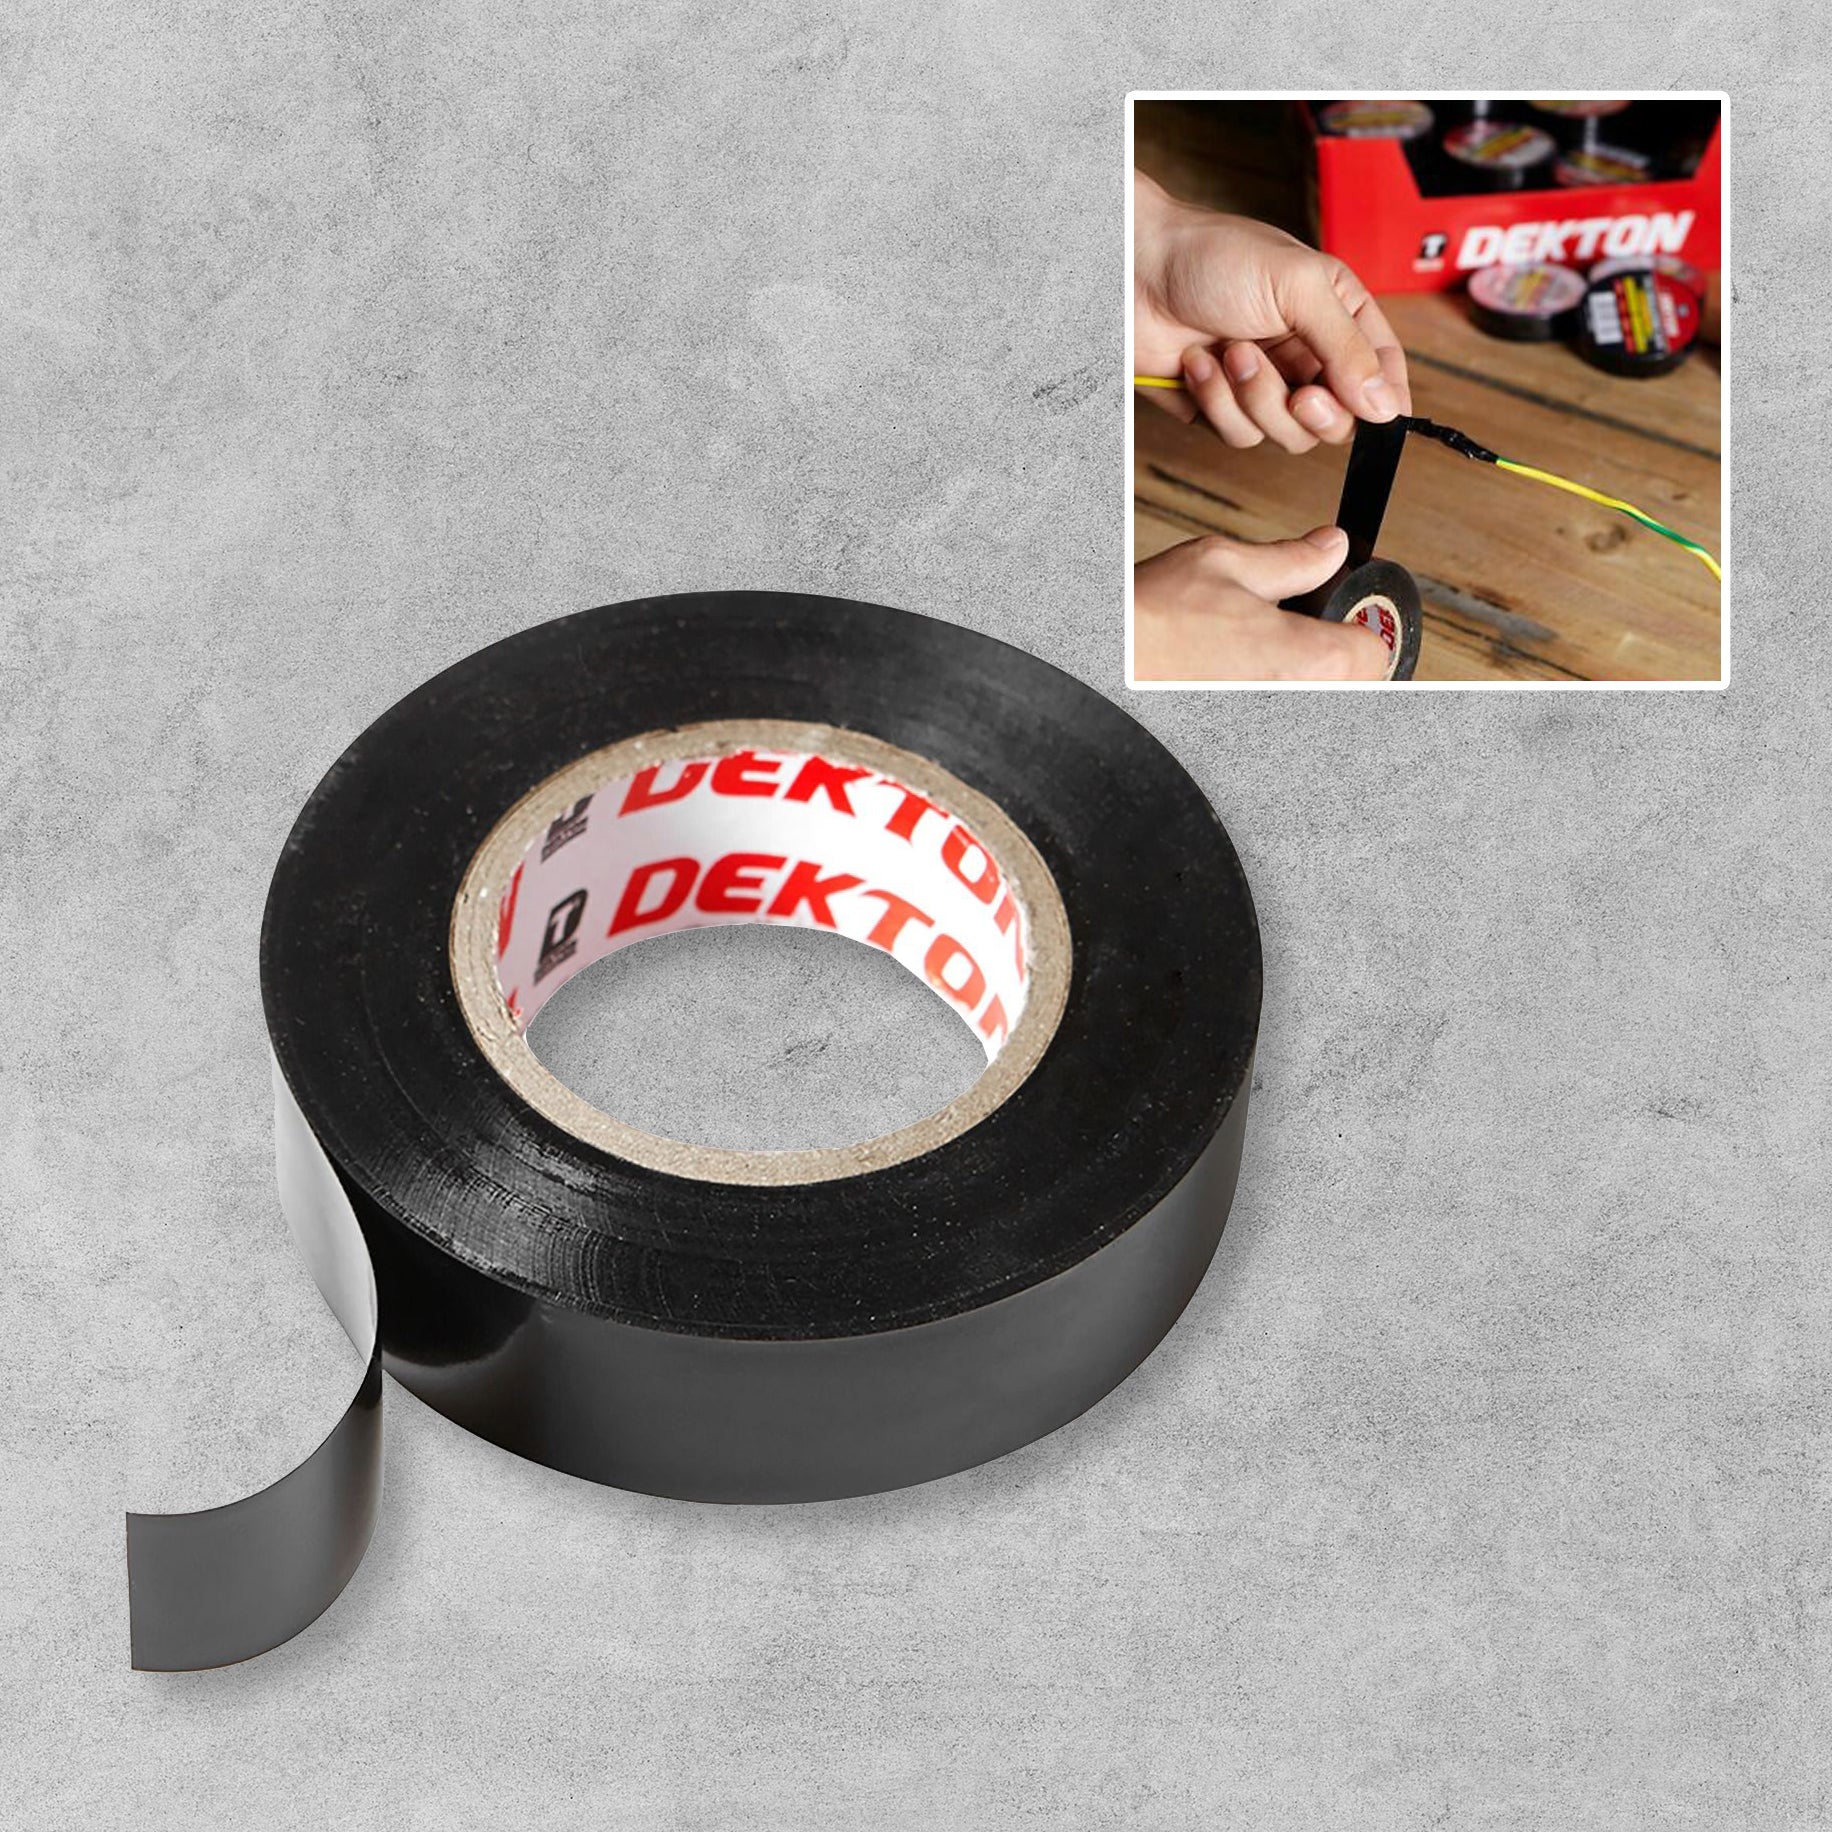 PVC Electrical Insulating Tape - Black by Dekton, sold by In-Excess